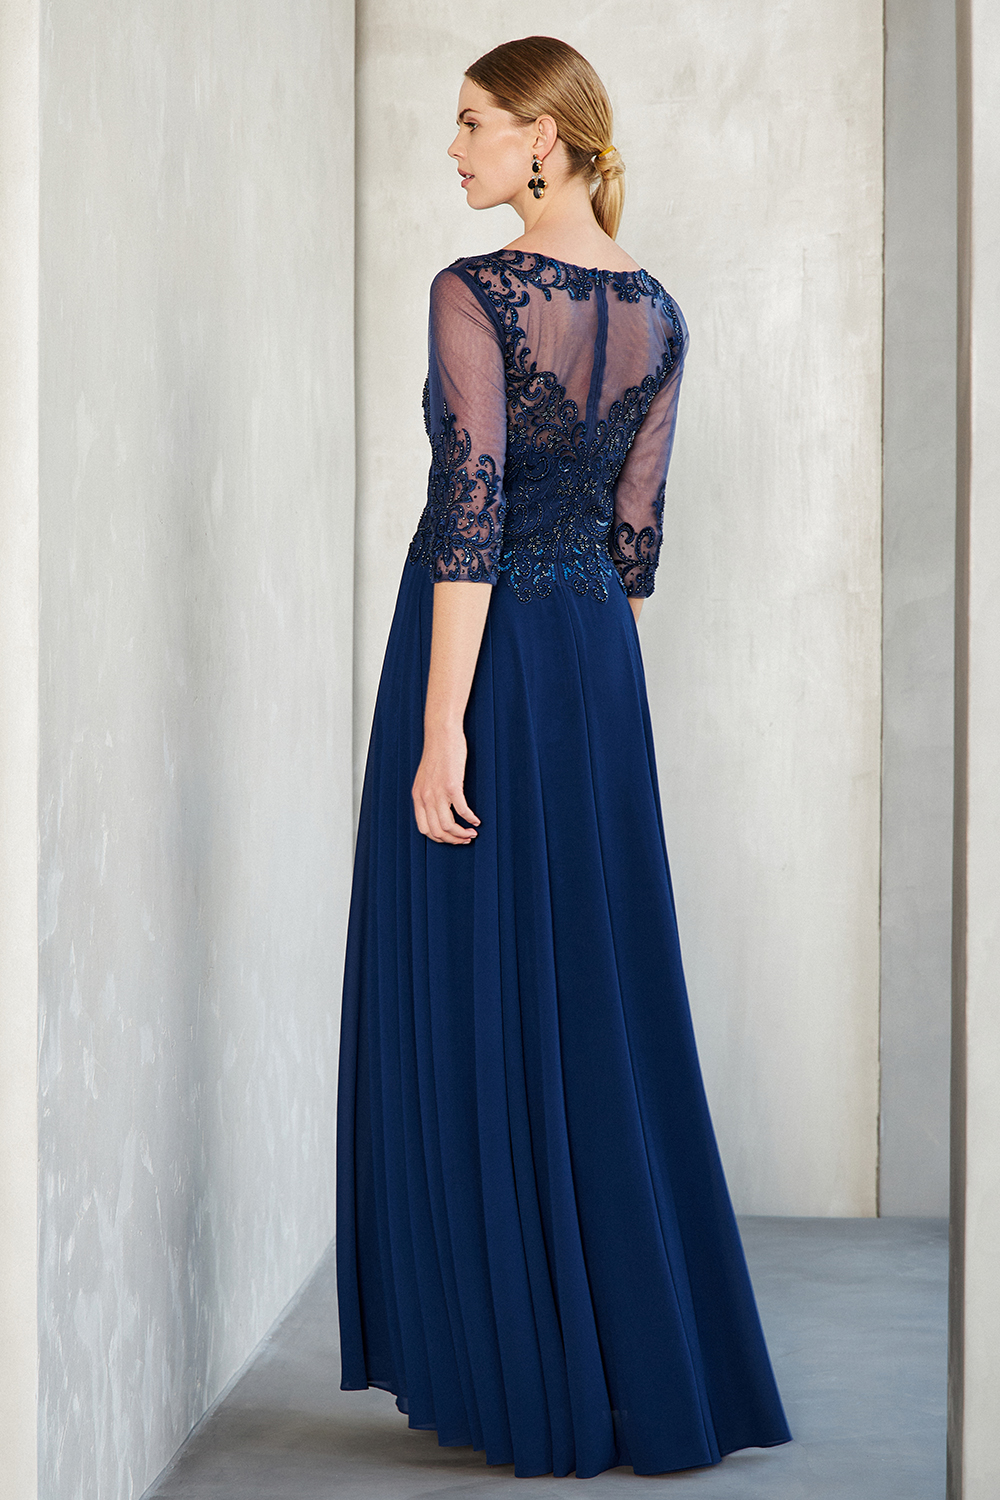 Classic Dresses / Long evening dress with chiffon fabric, lace and beading at the top and long sleeves